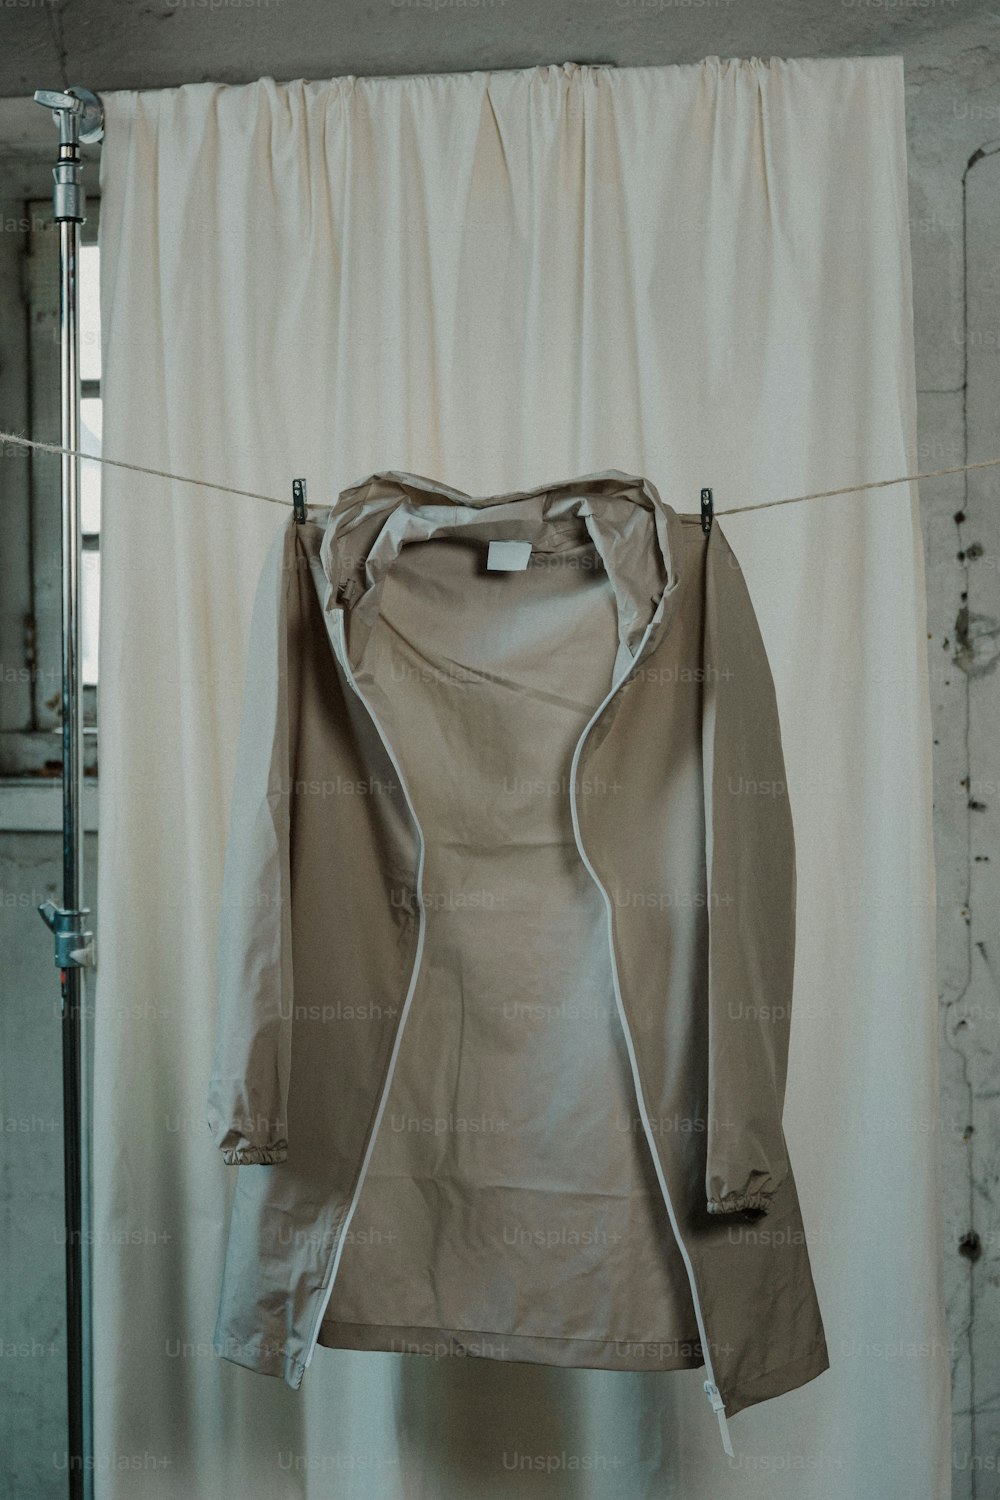 a jacket hanging on a clothes line in front of a curtain